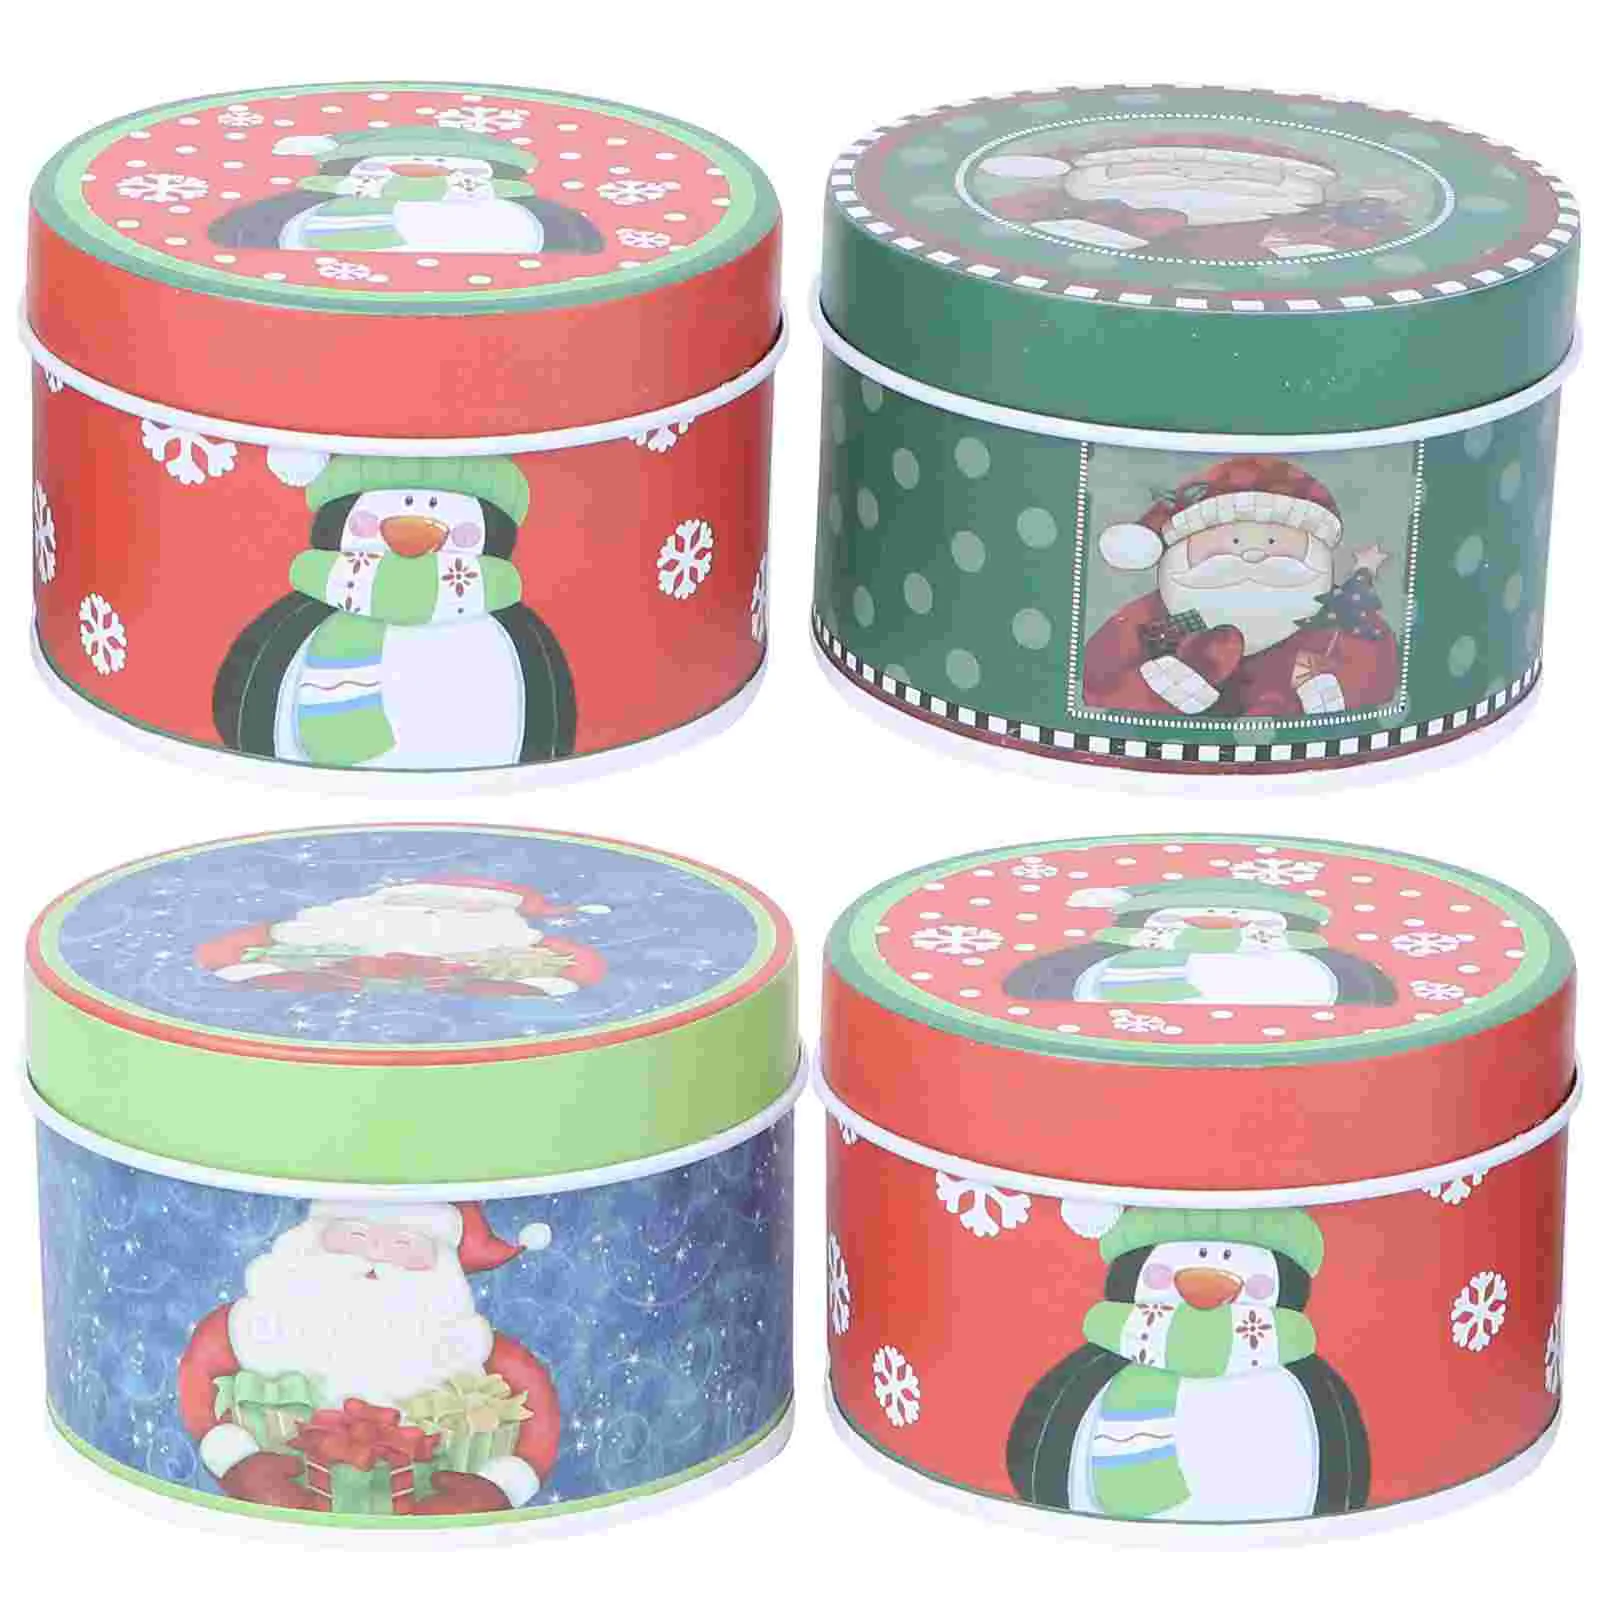 

Christmas Tin Boxes Gift Box Candycans Metal Cookie Holiday Goodie Favor Containers Wrapping Can Window Lidslid Tinplate Present